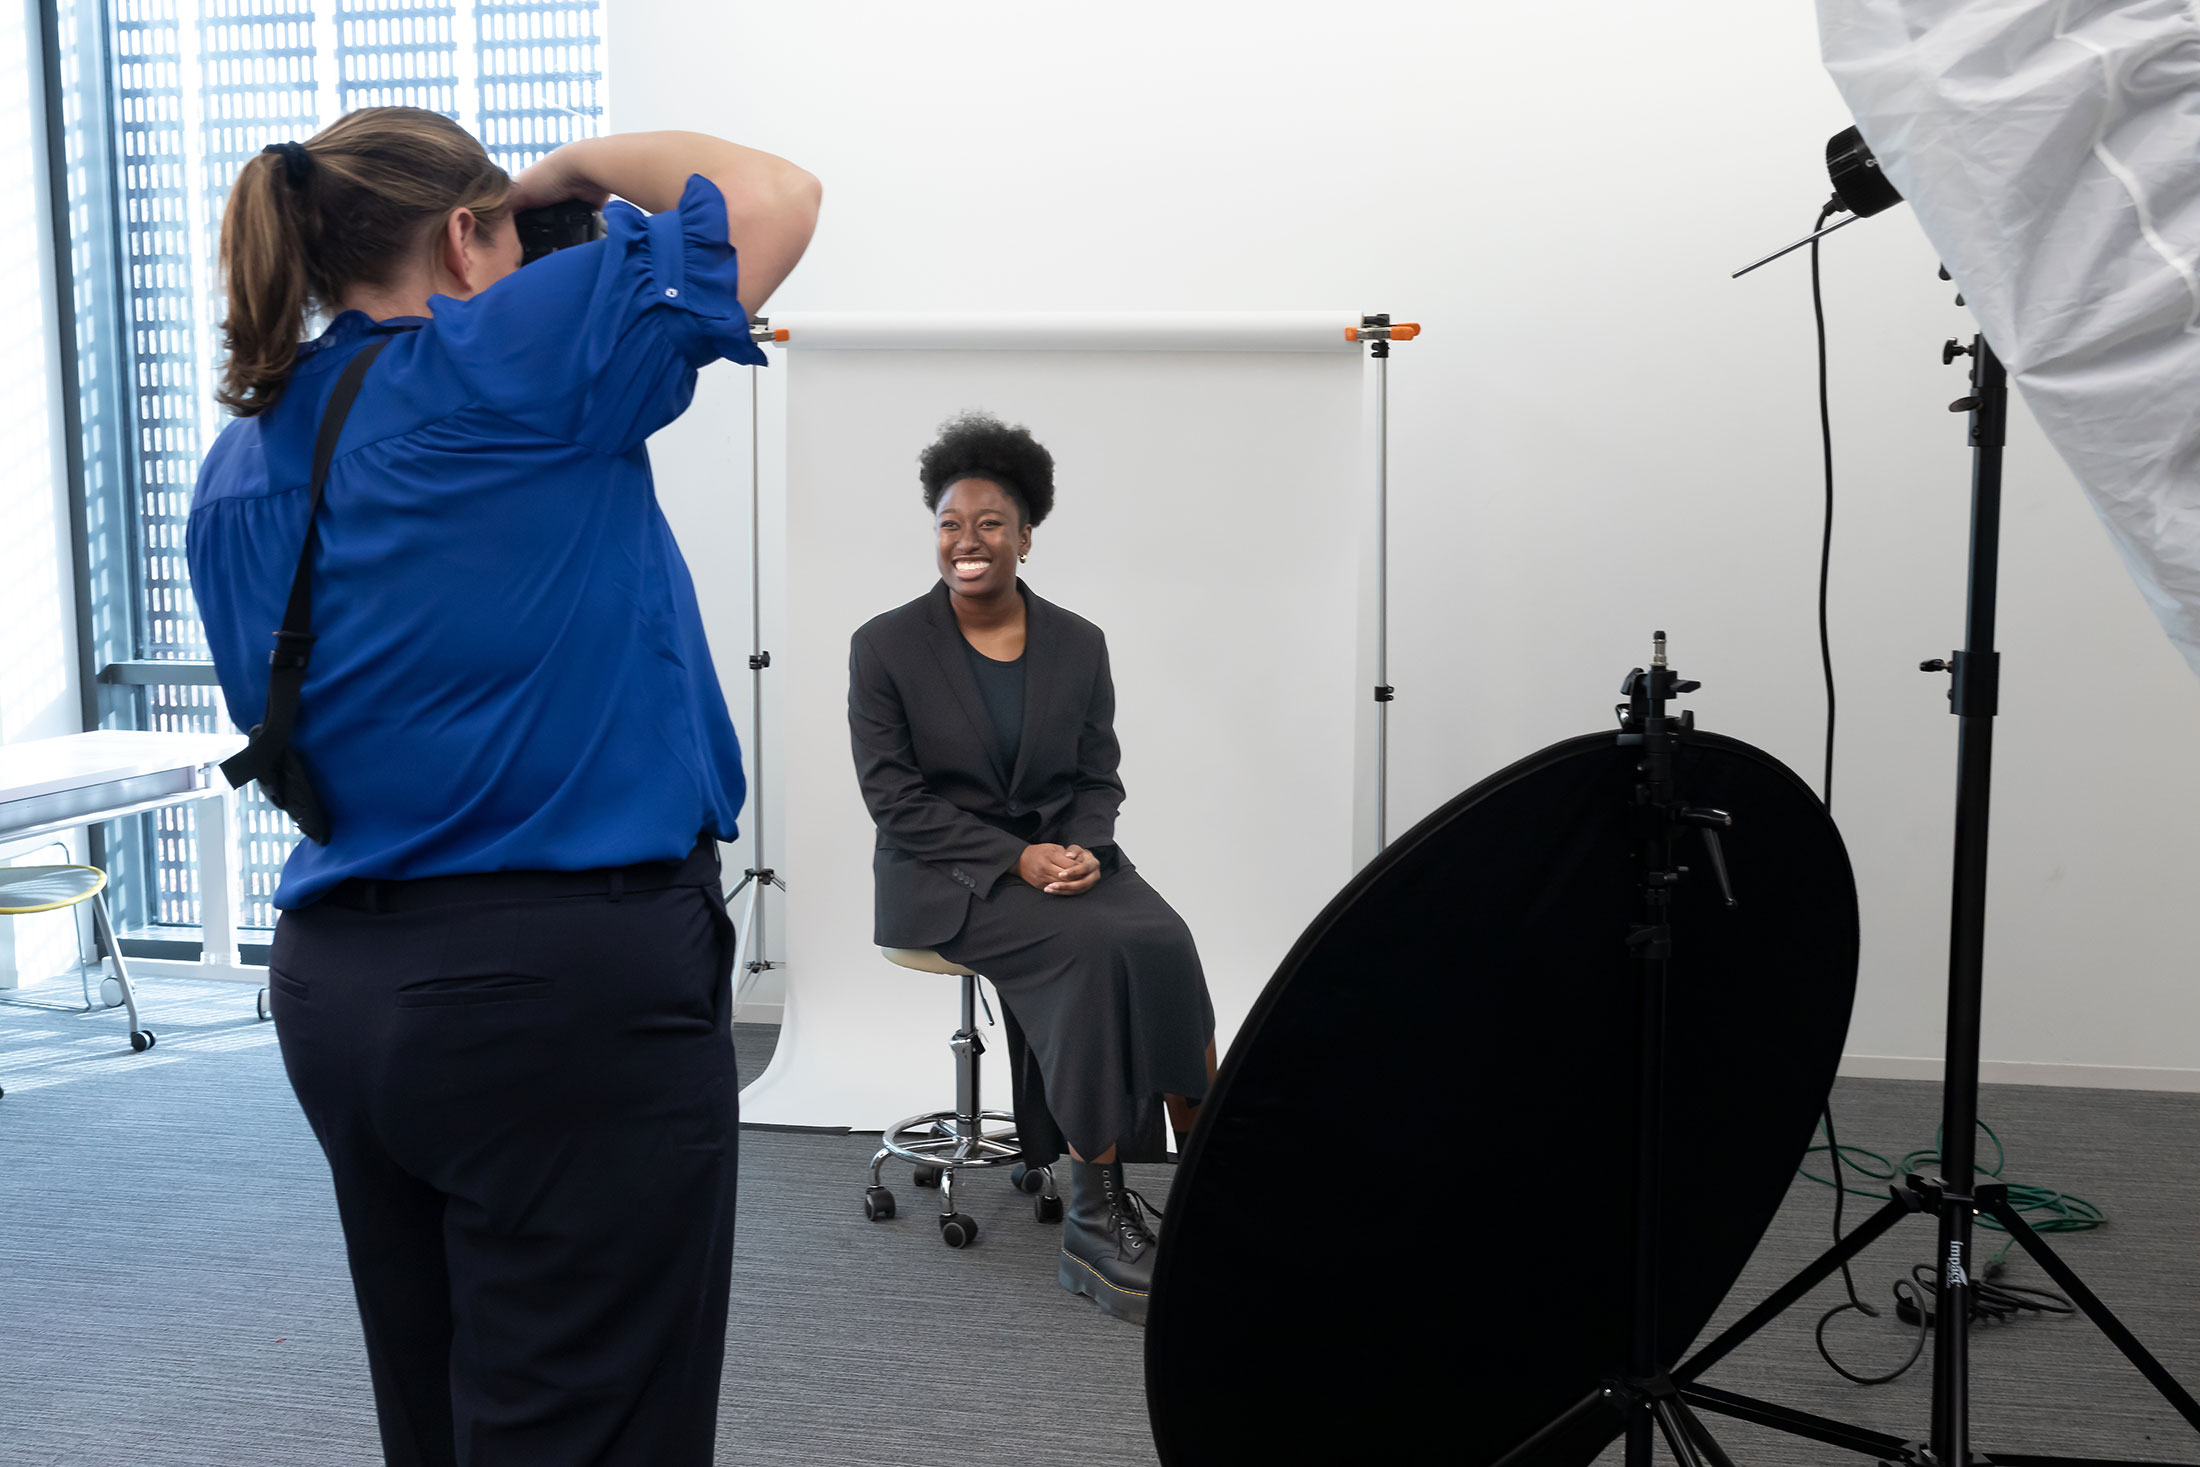 A woman smiles while getting her professional headshot taken.